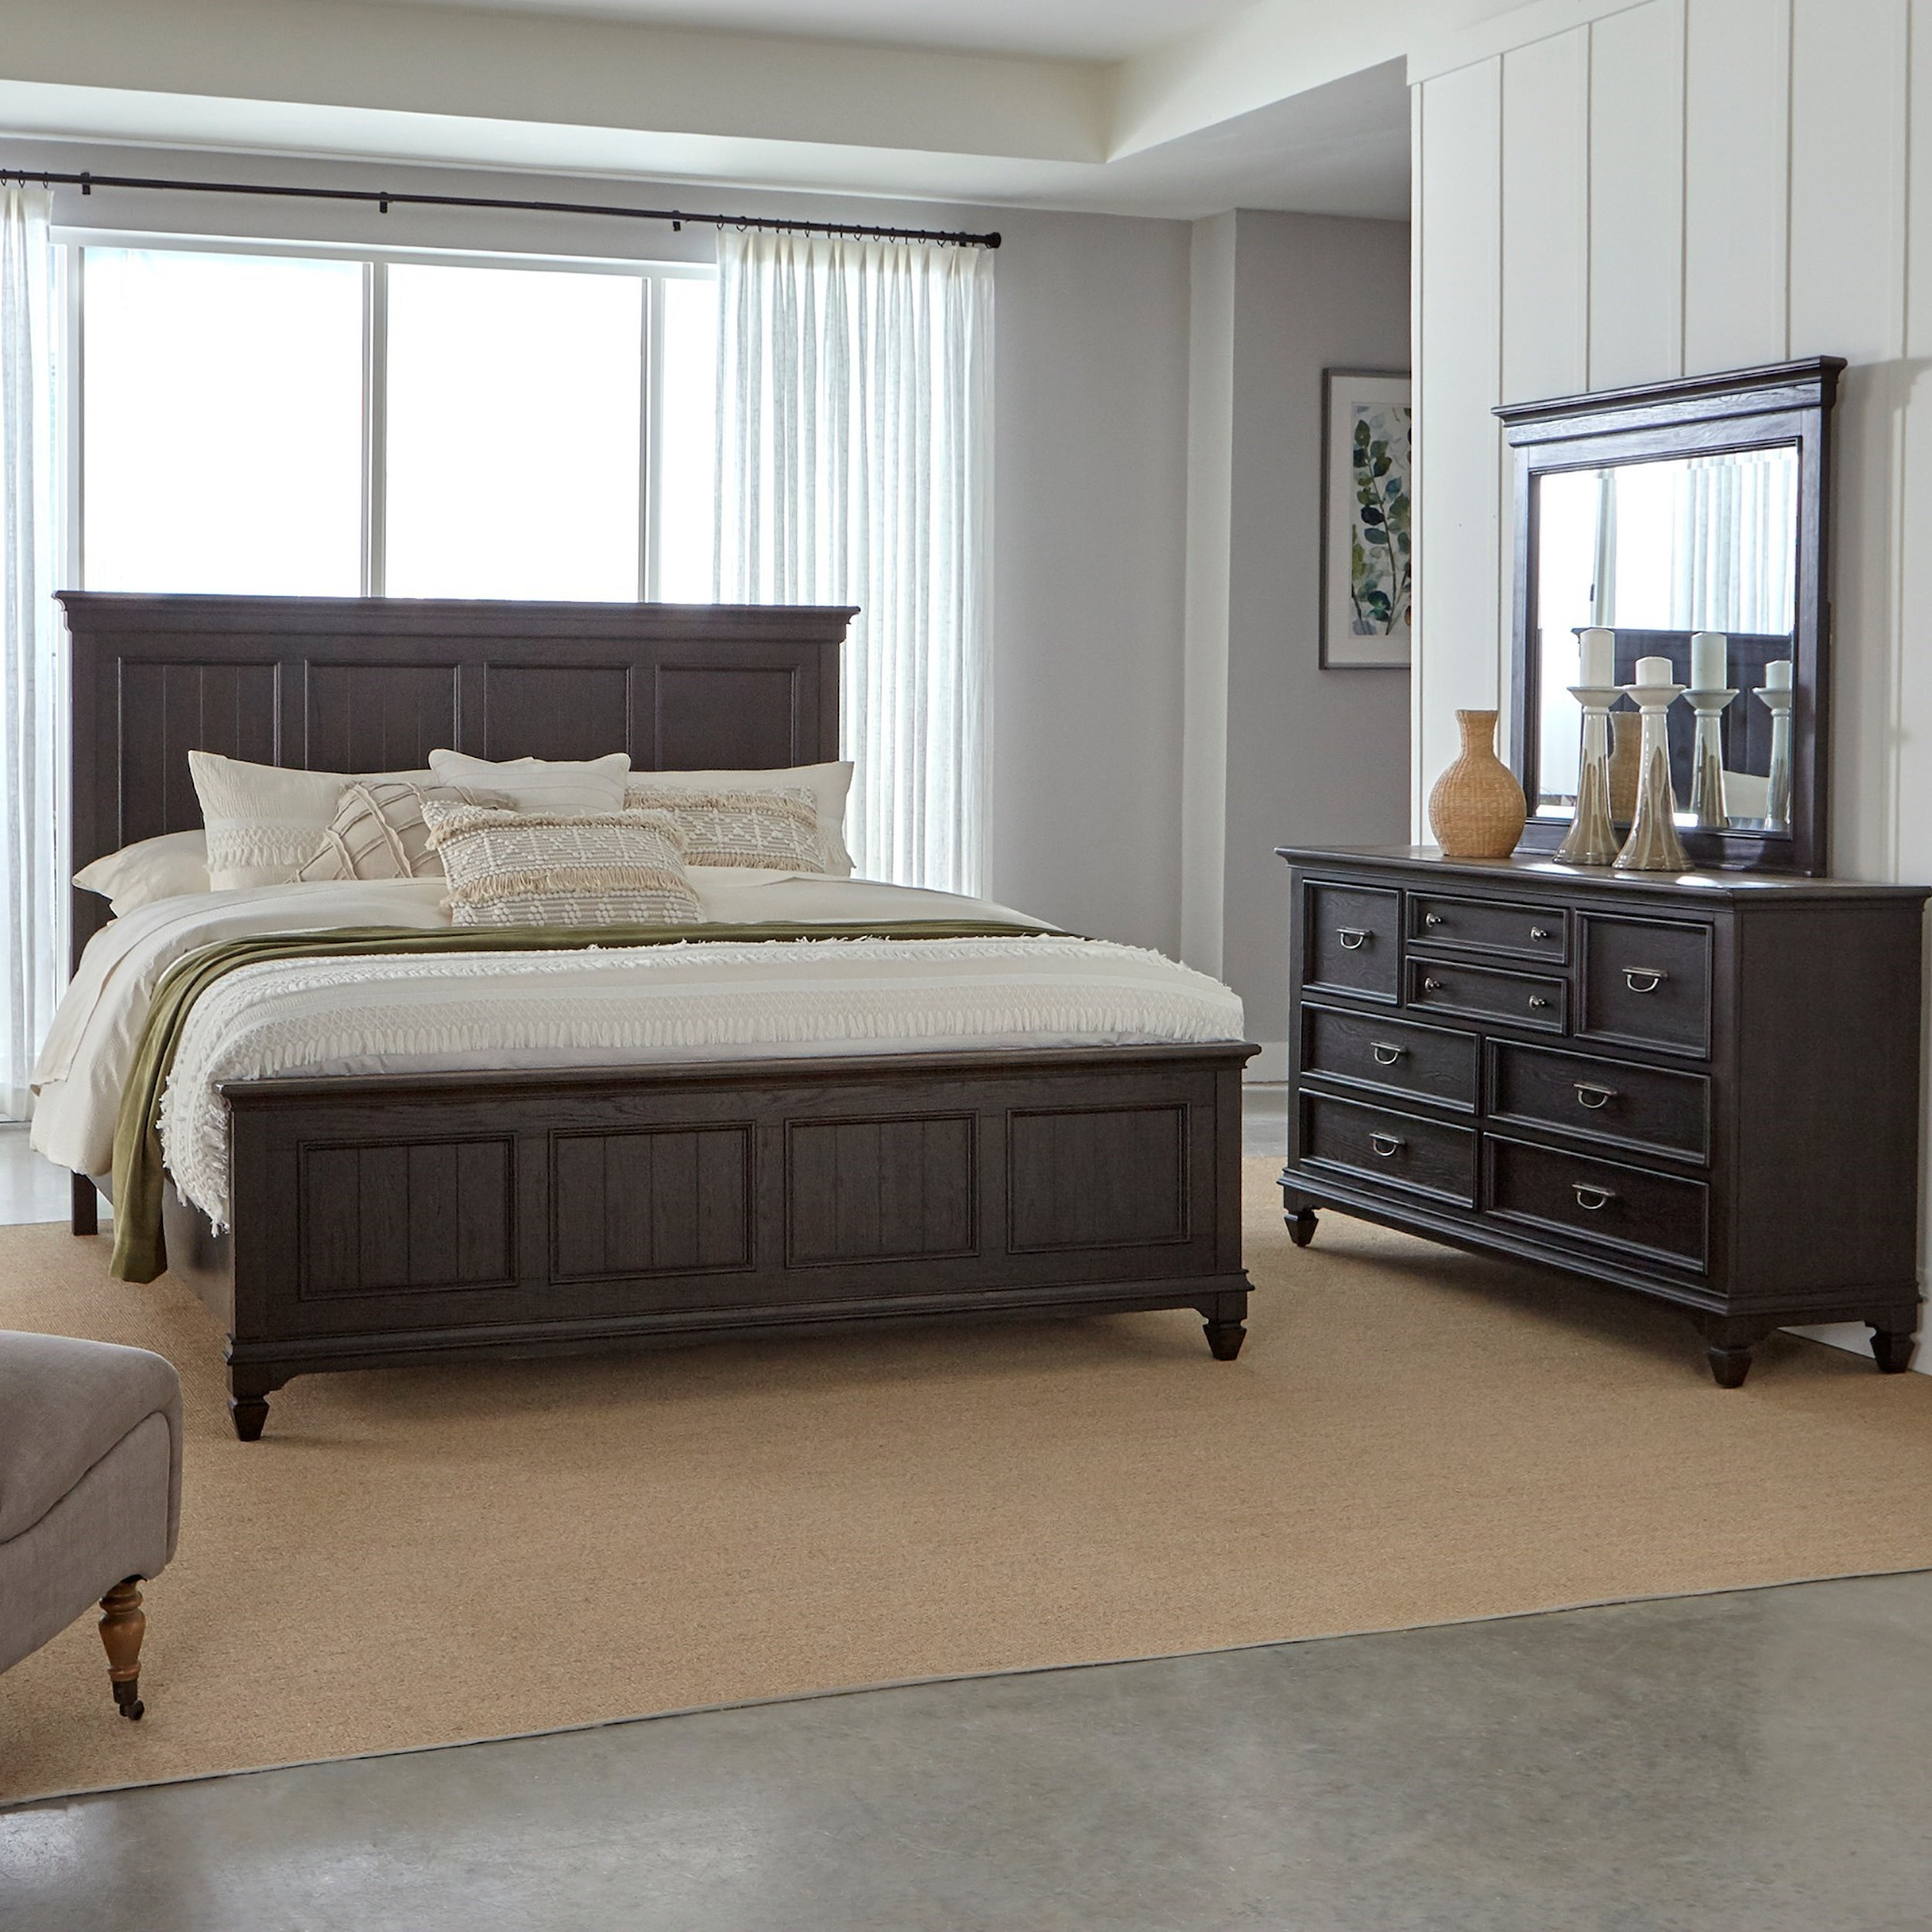 Liberty Furniture Allyson Park 417b Br Kpb Cottage King Panel Bed With Crown Molded Headboard